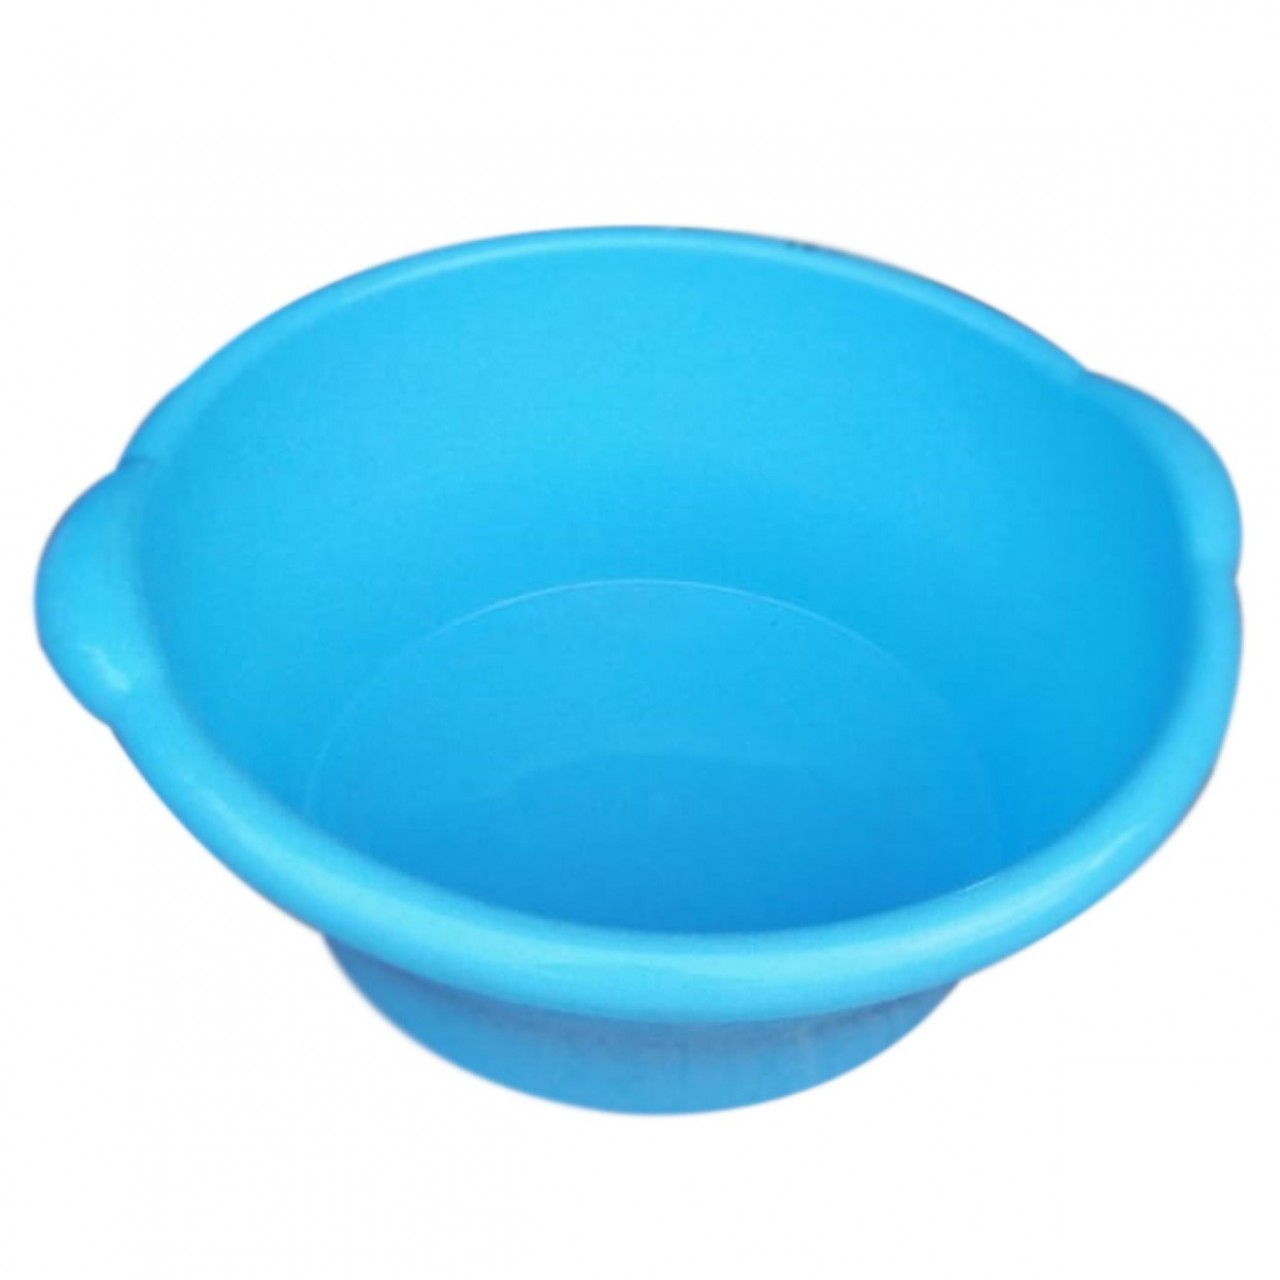 Plastic Basin For Home Use